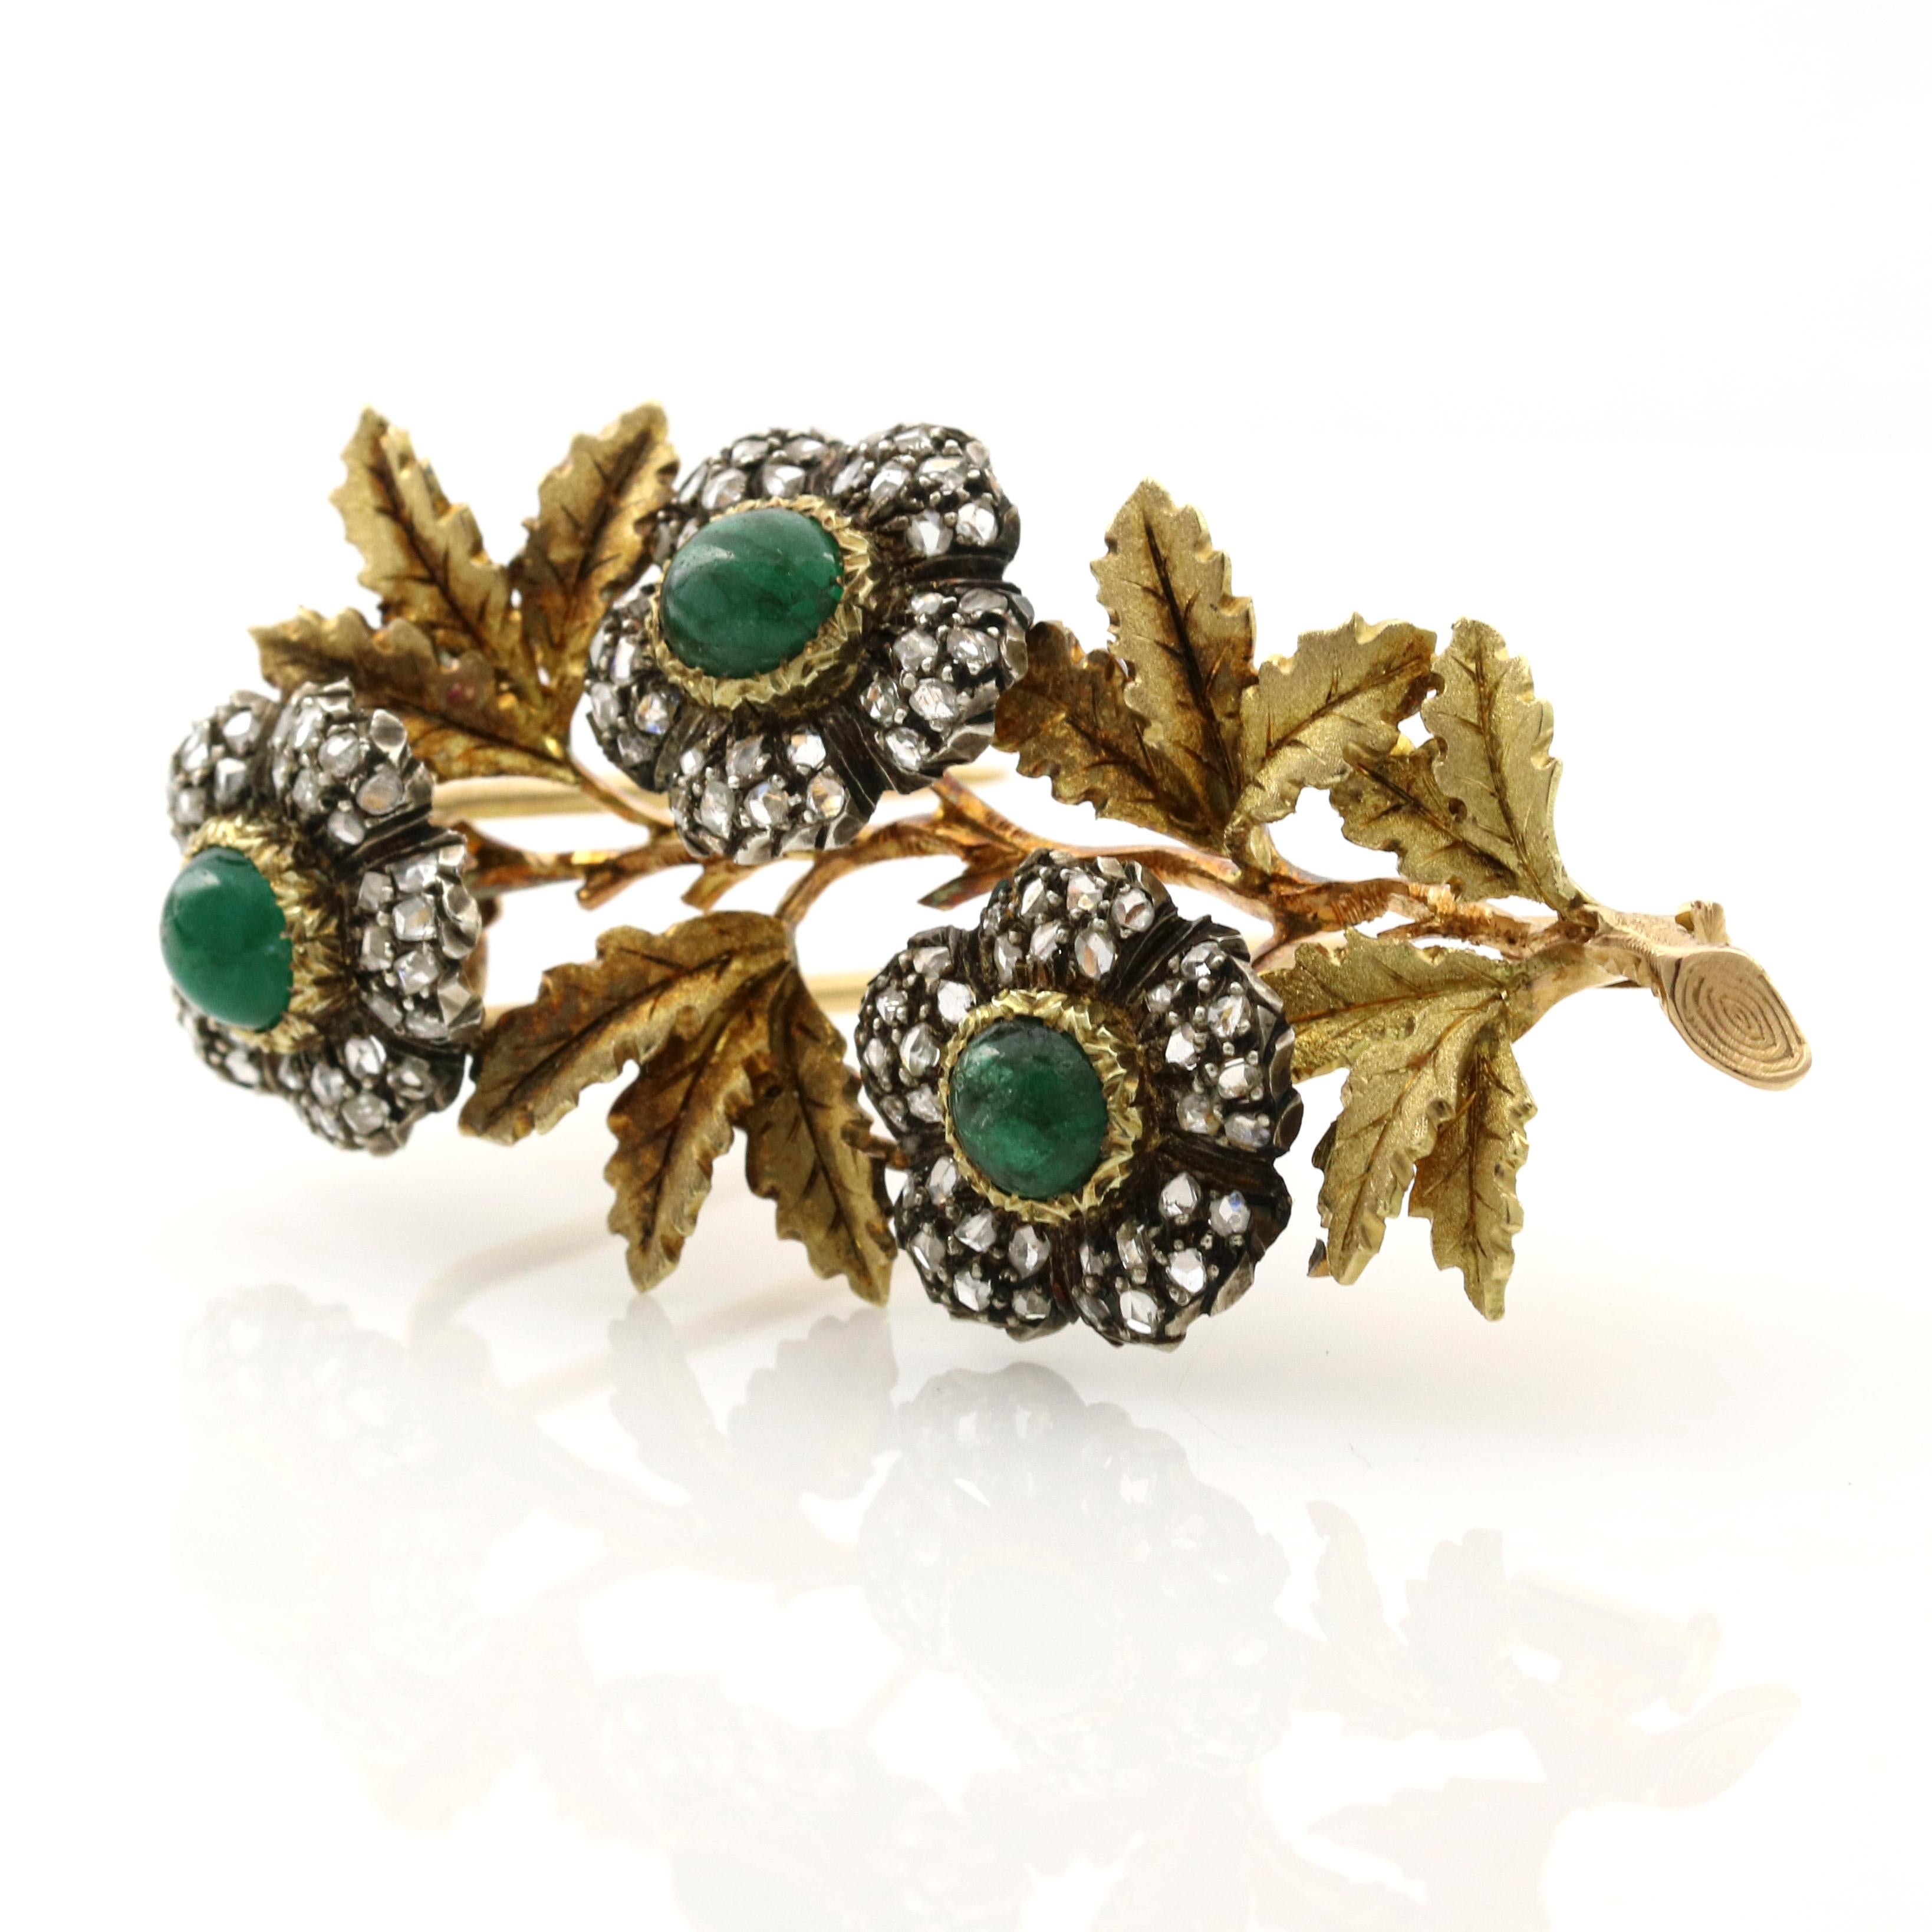 Flower brooch by Buccellati in 18-karat yellow gold. The pin has 3 cabochon emeralds surrounded by 120 rose-cut natural diamonds. Appraisal by Buccellati in 2012 replacement value $37,800.

Emerald Total Carat Weight, 3.00 carats
Diamond Total Carat